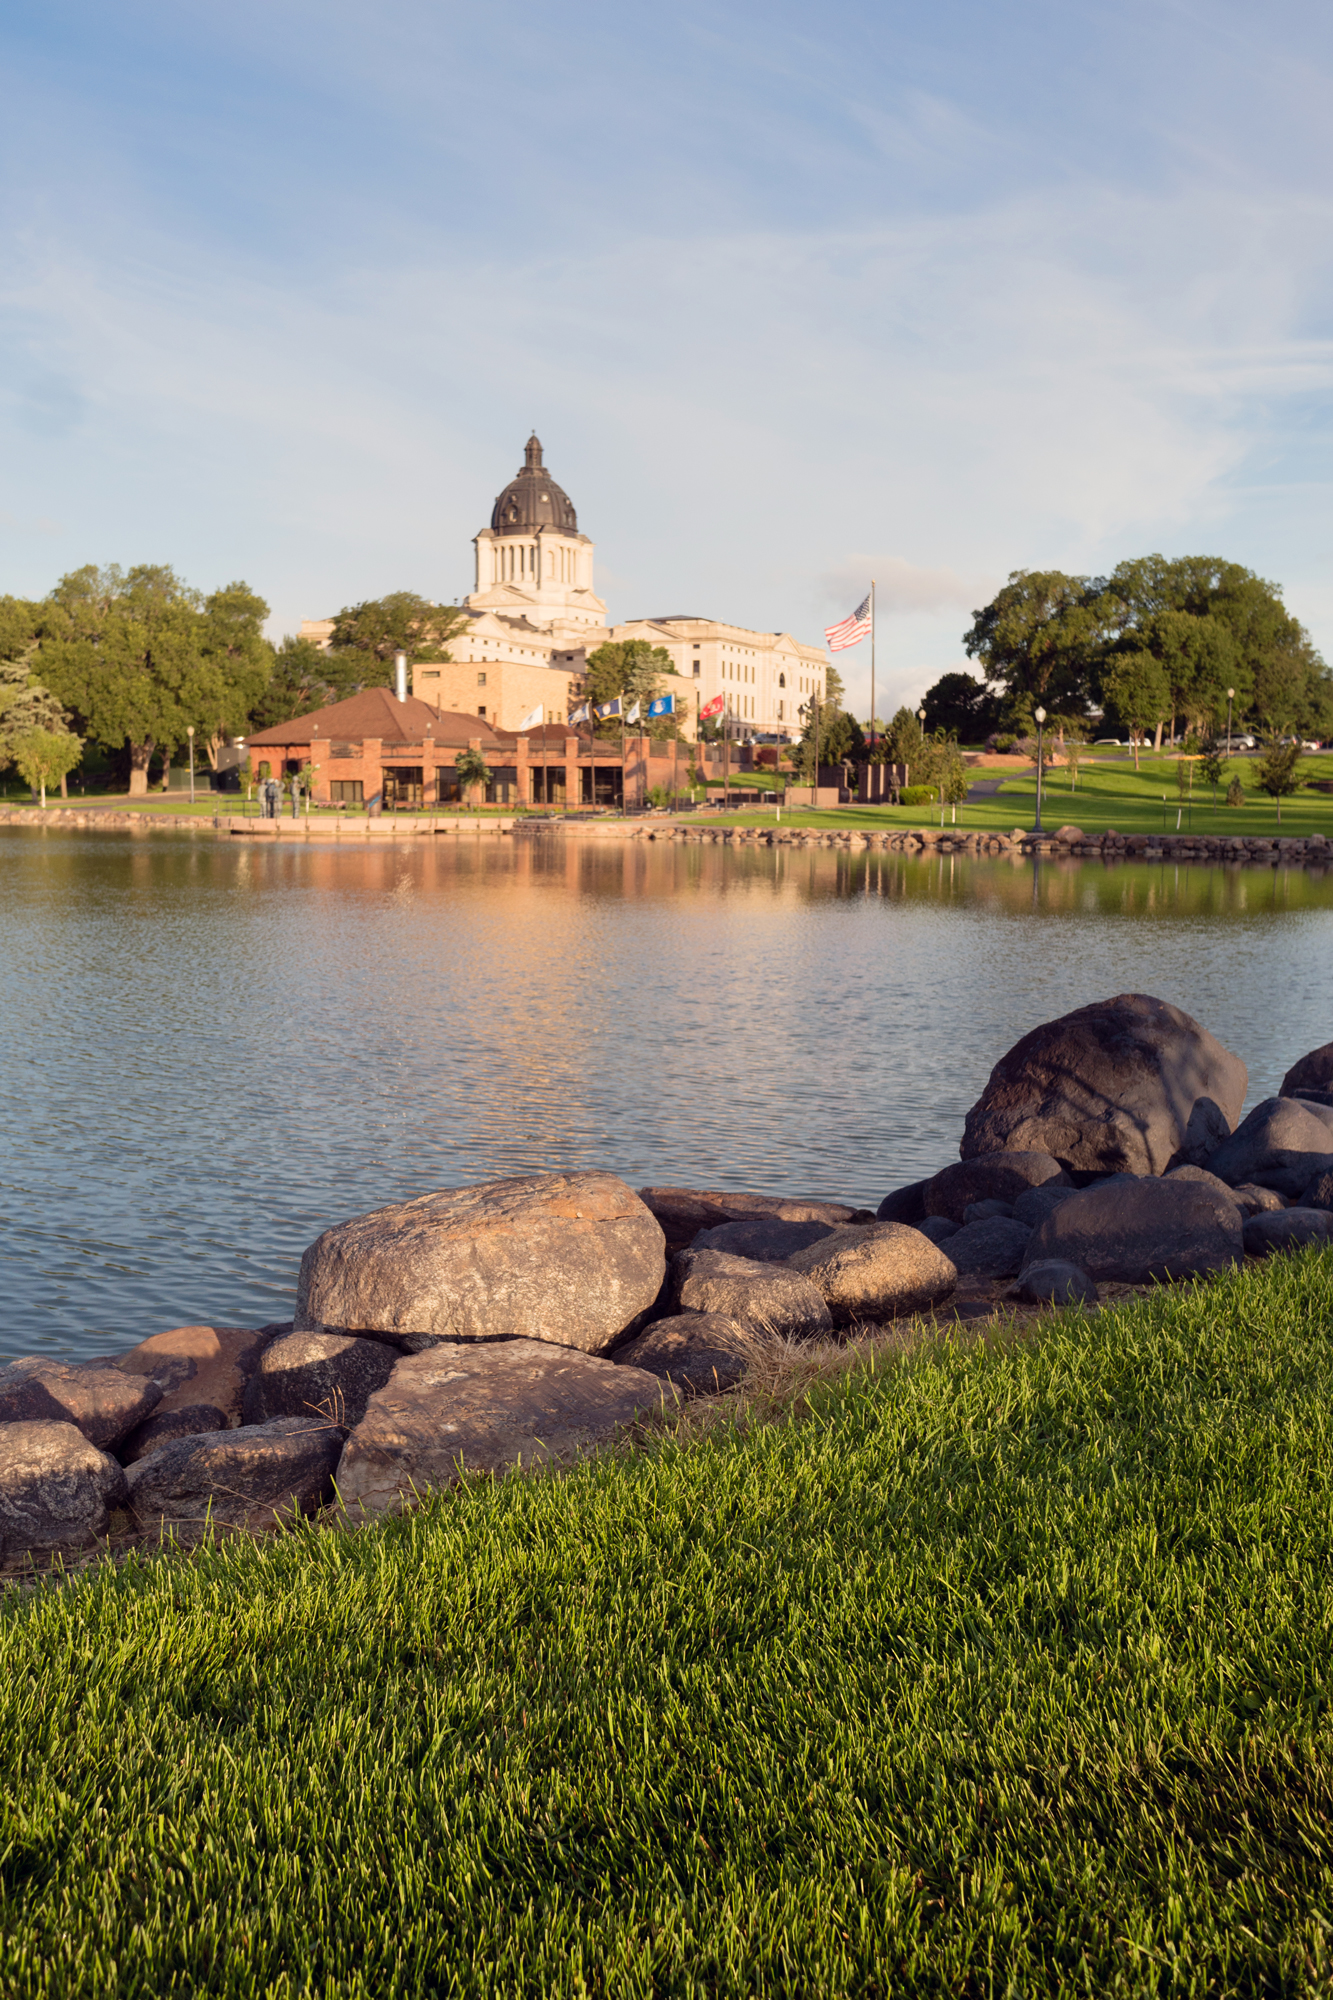 View of SD capitol building from across Capitol Lake.